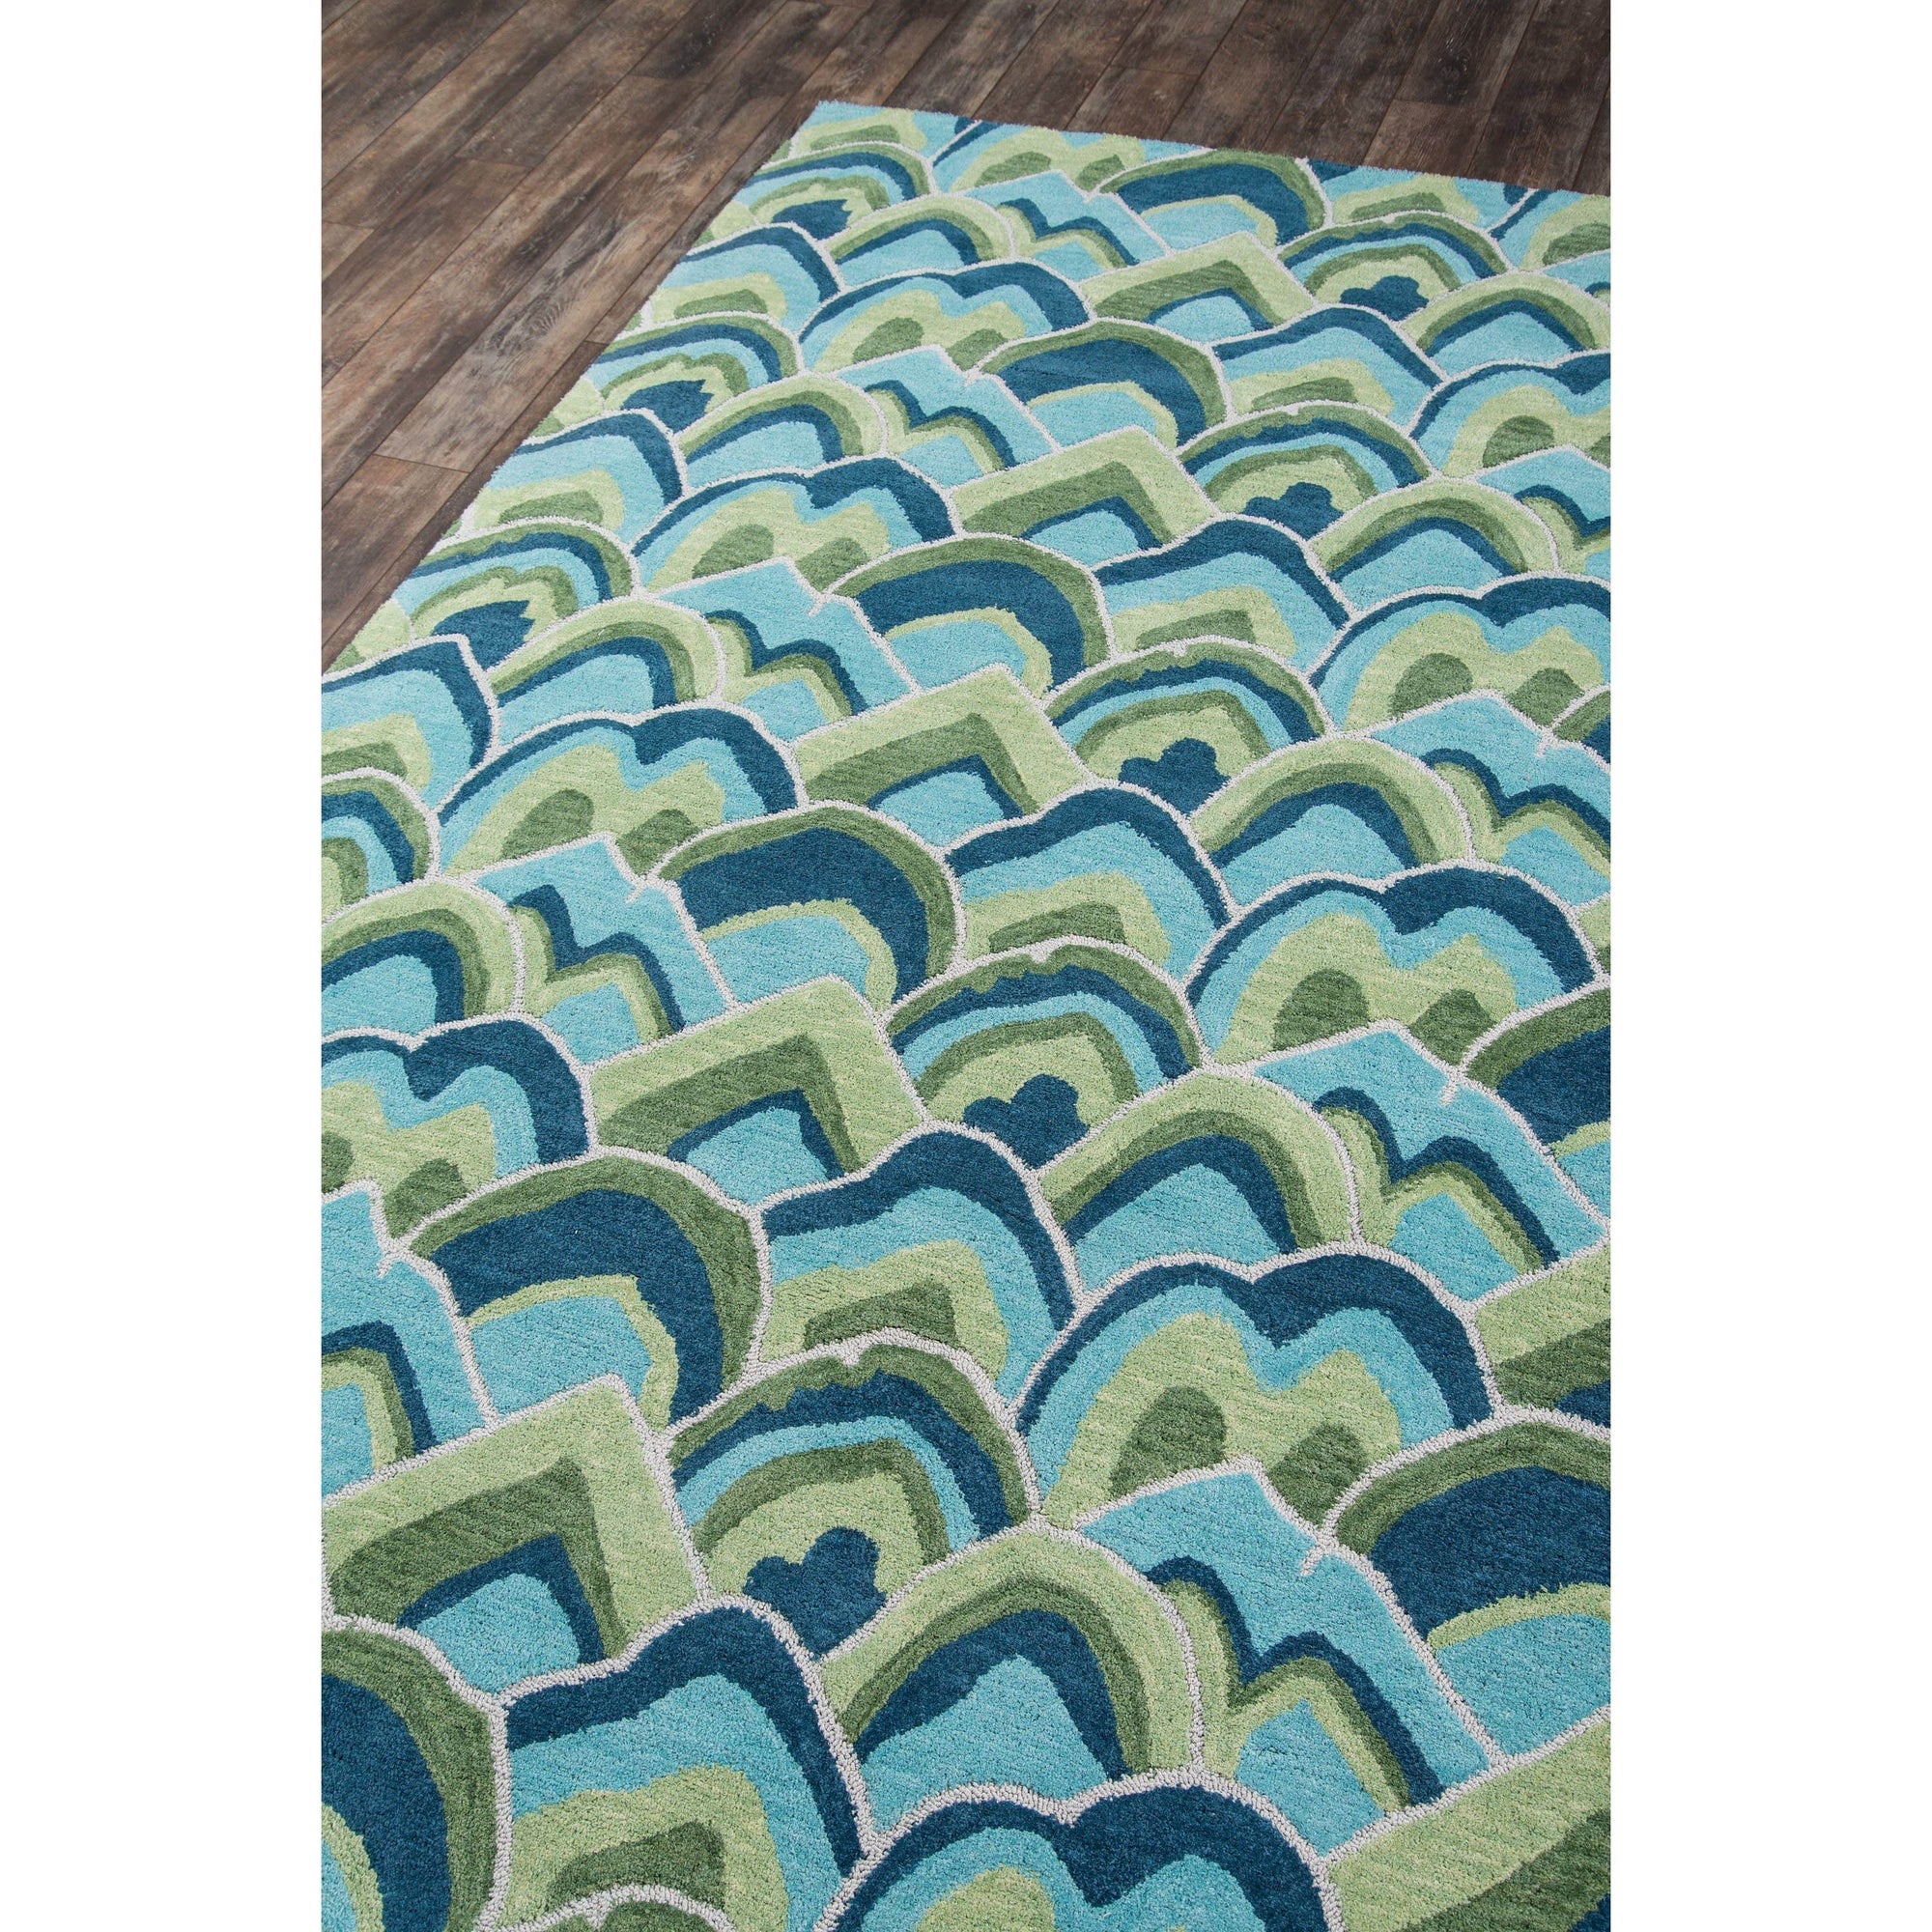 Rugs by Roo | Momeni Embrace Adventure Cloud Club Green Area Rug-EMBRAEMB-1GRN2030